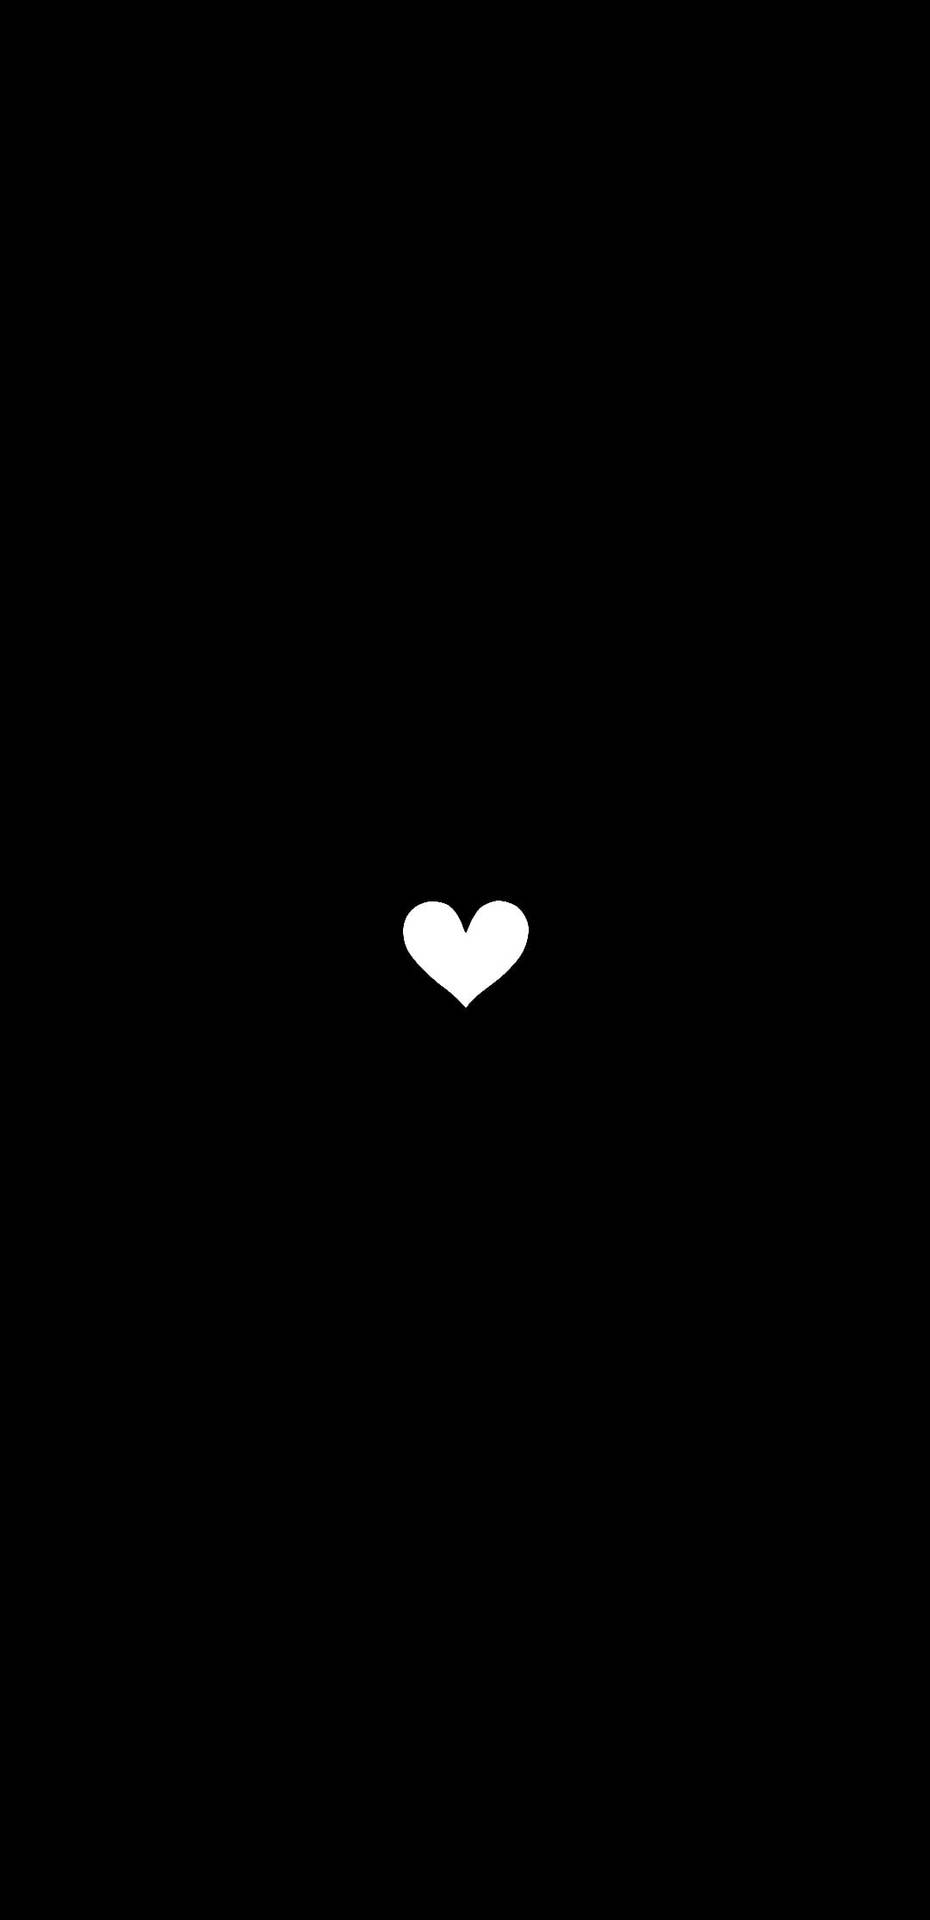 Small Black And White Heart